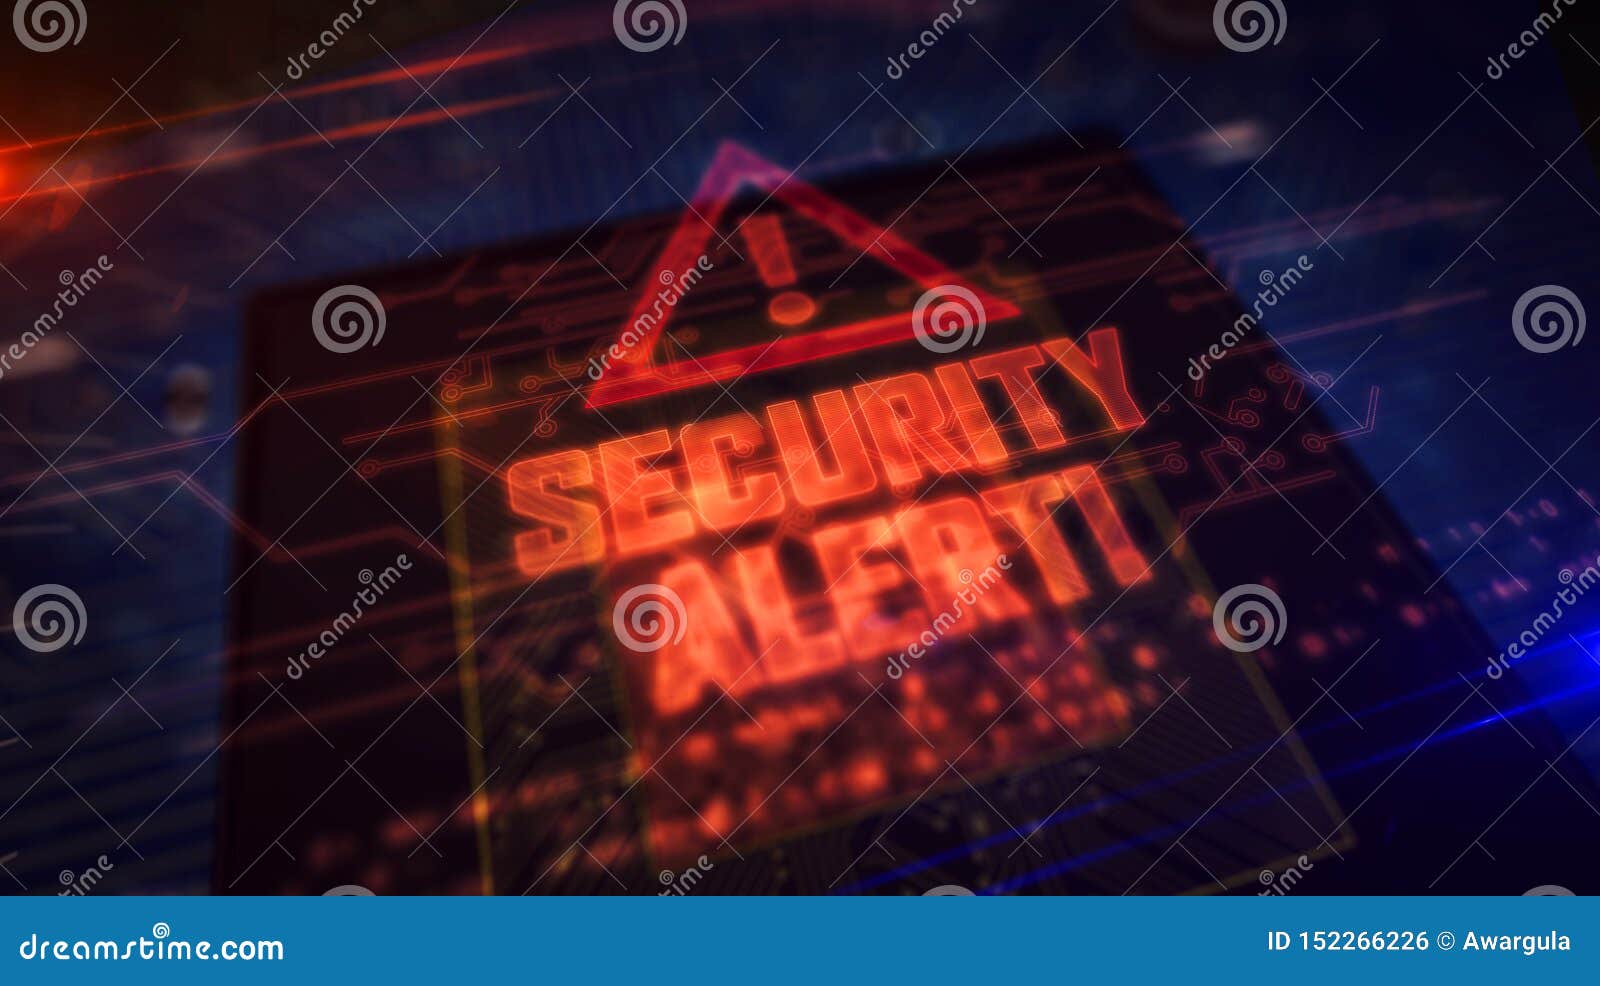 cpu on board with security alert hologram